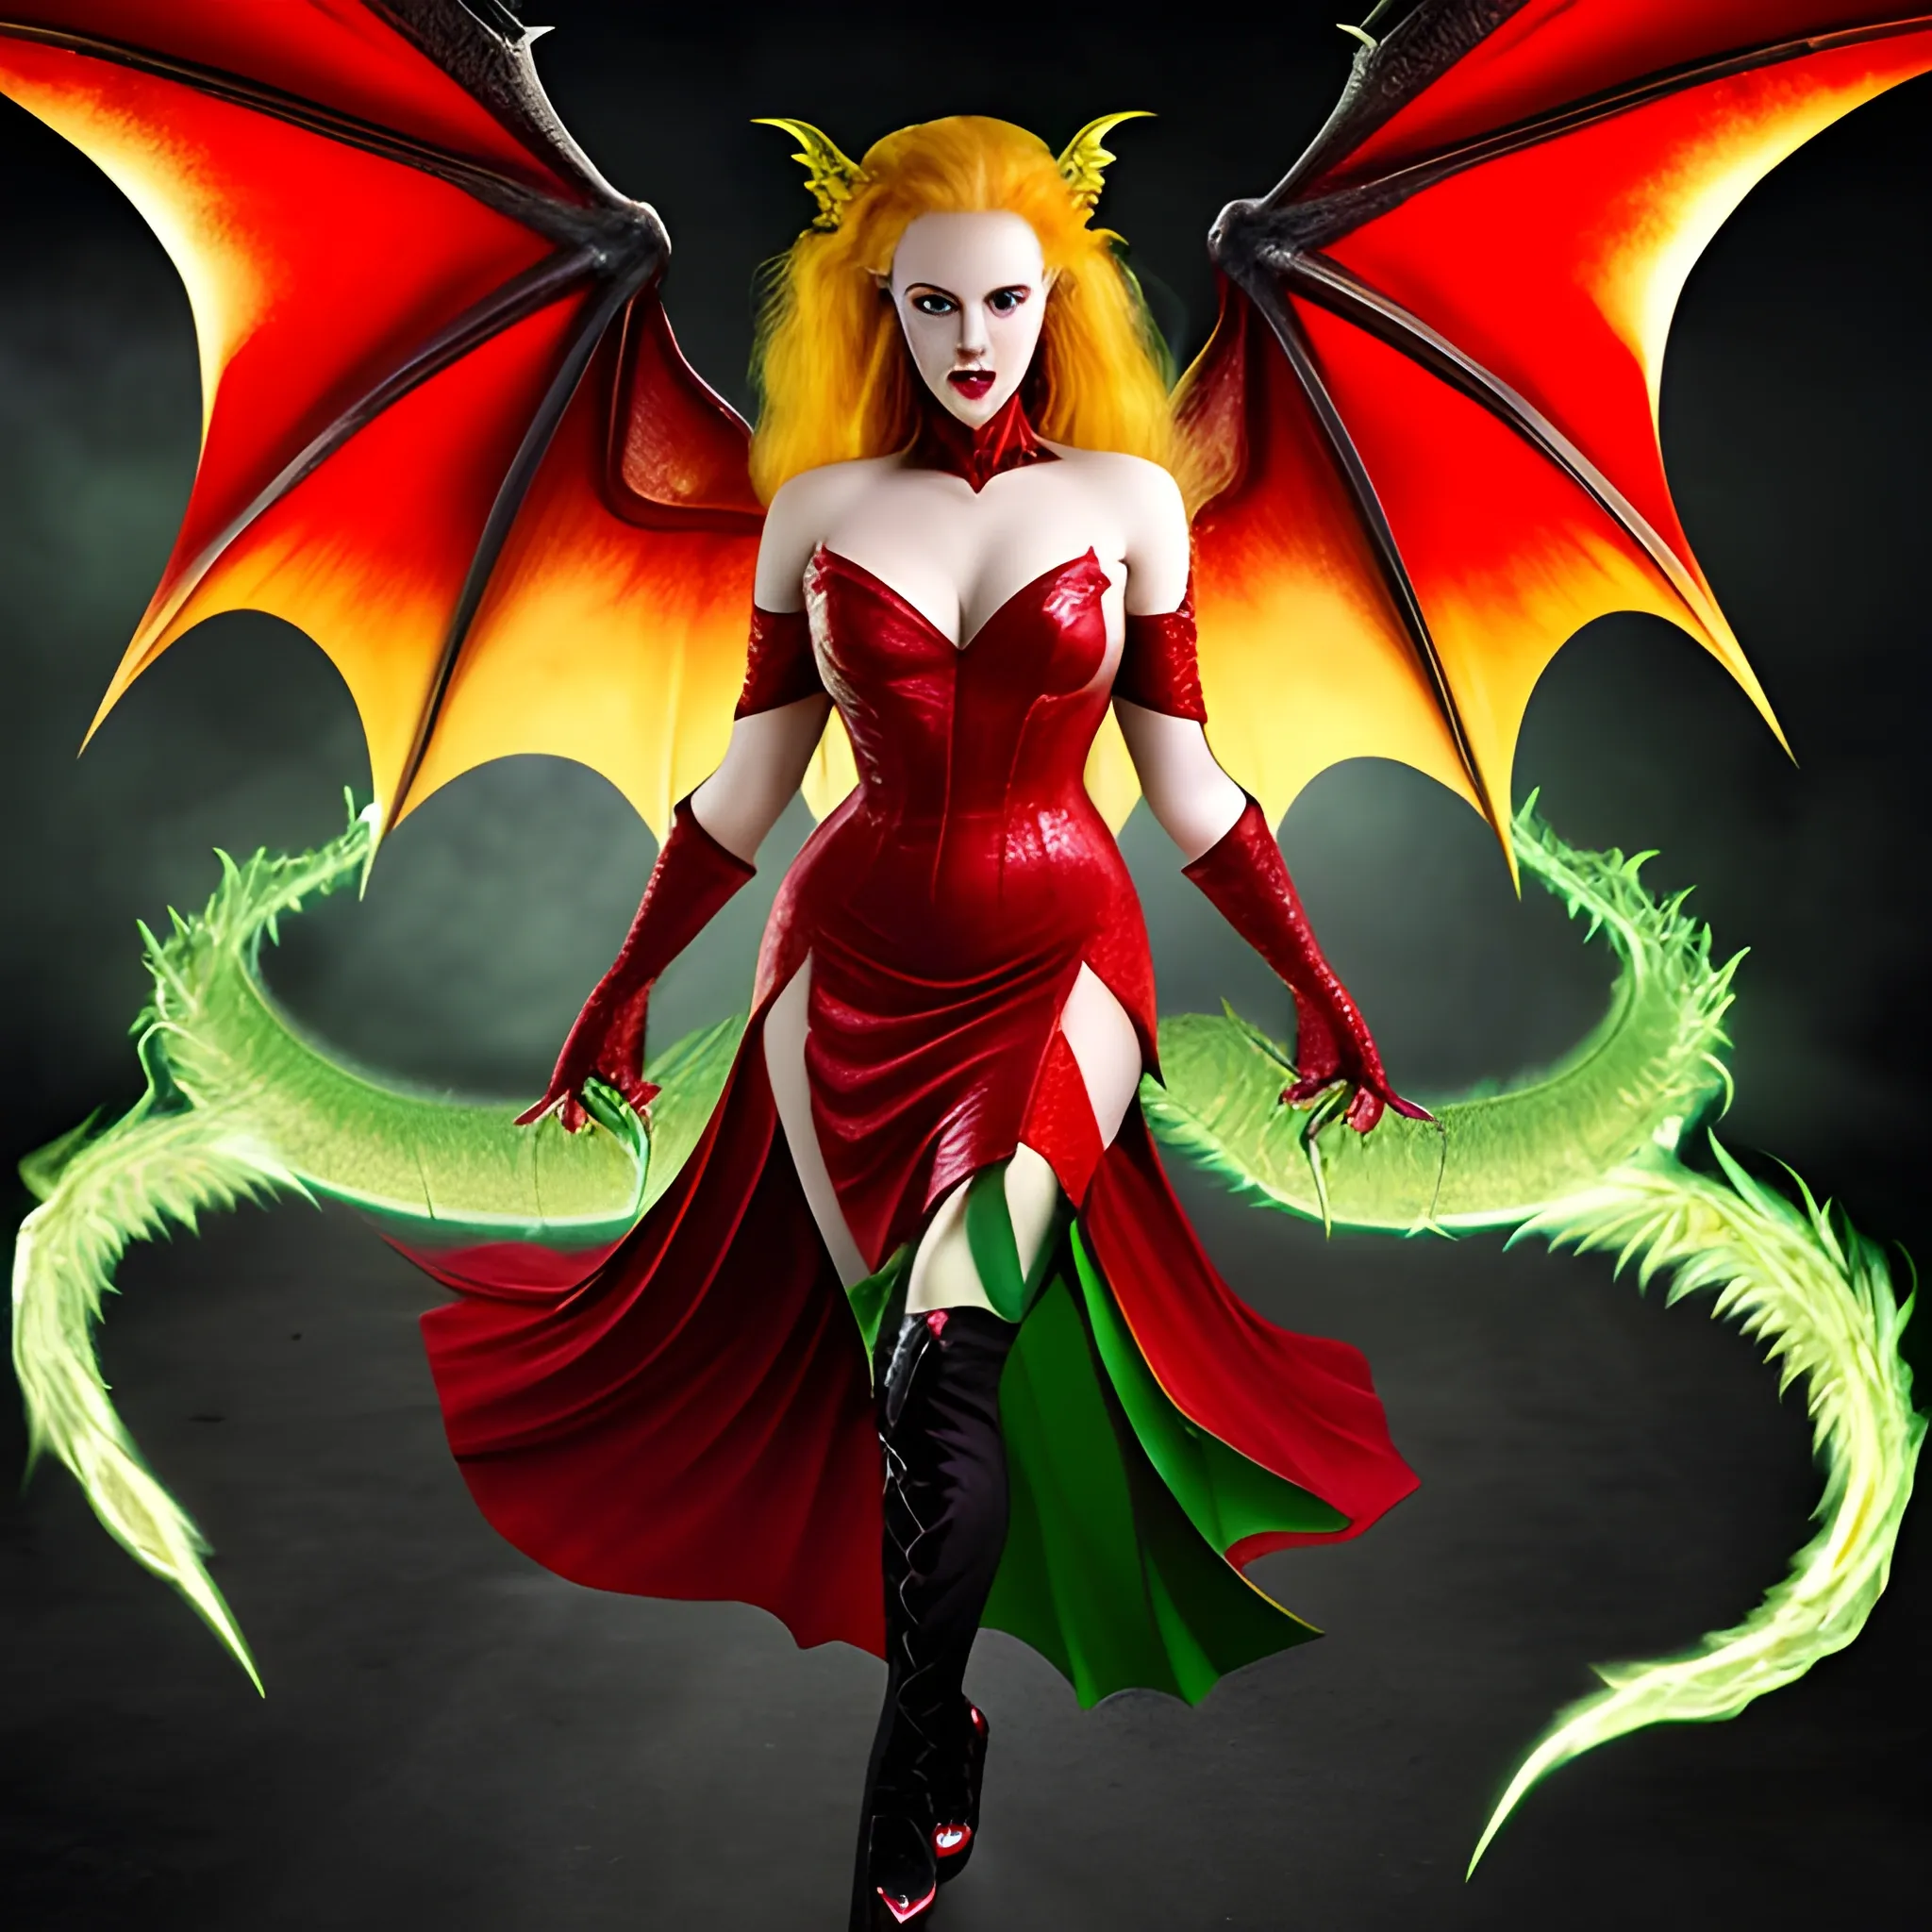 Photo of beautiful dragon-woman. Red dress. Green eyes, golden hair, green wings, black stockings, red high heeled shoes, sharp teeth, clawed hands, majestic, terrible, scary, breathing fire, lightning